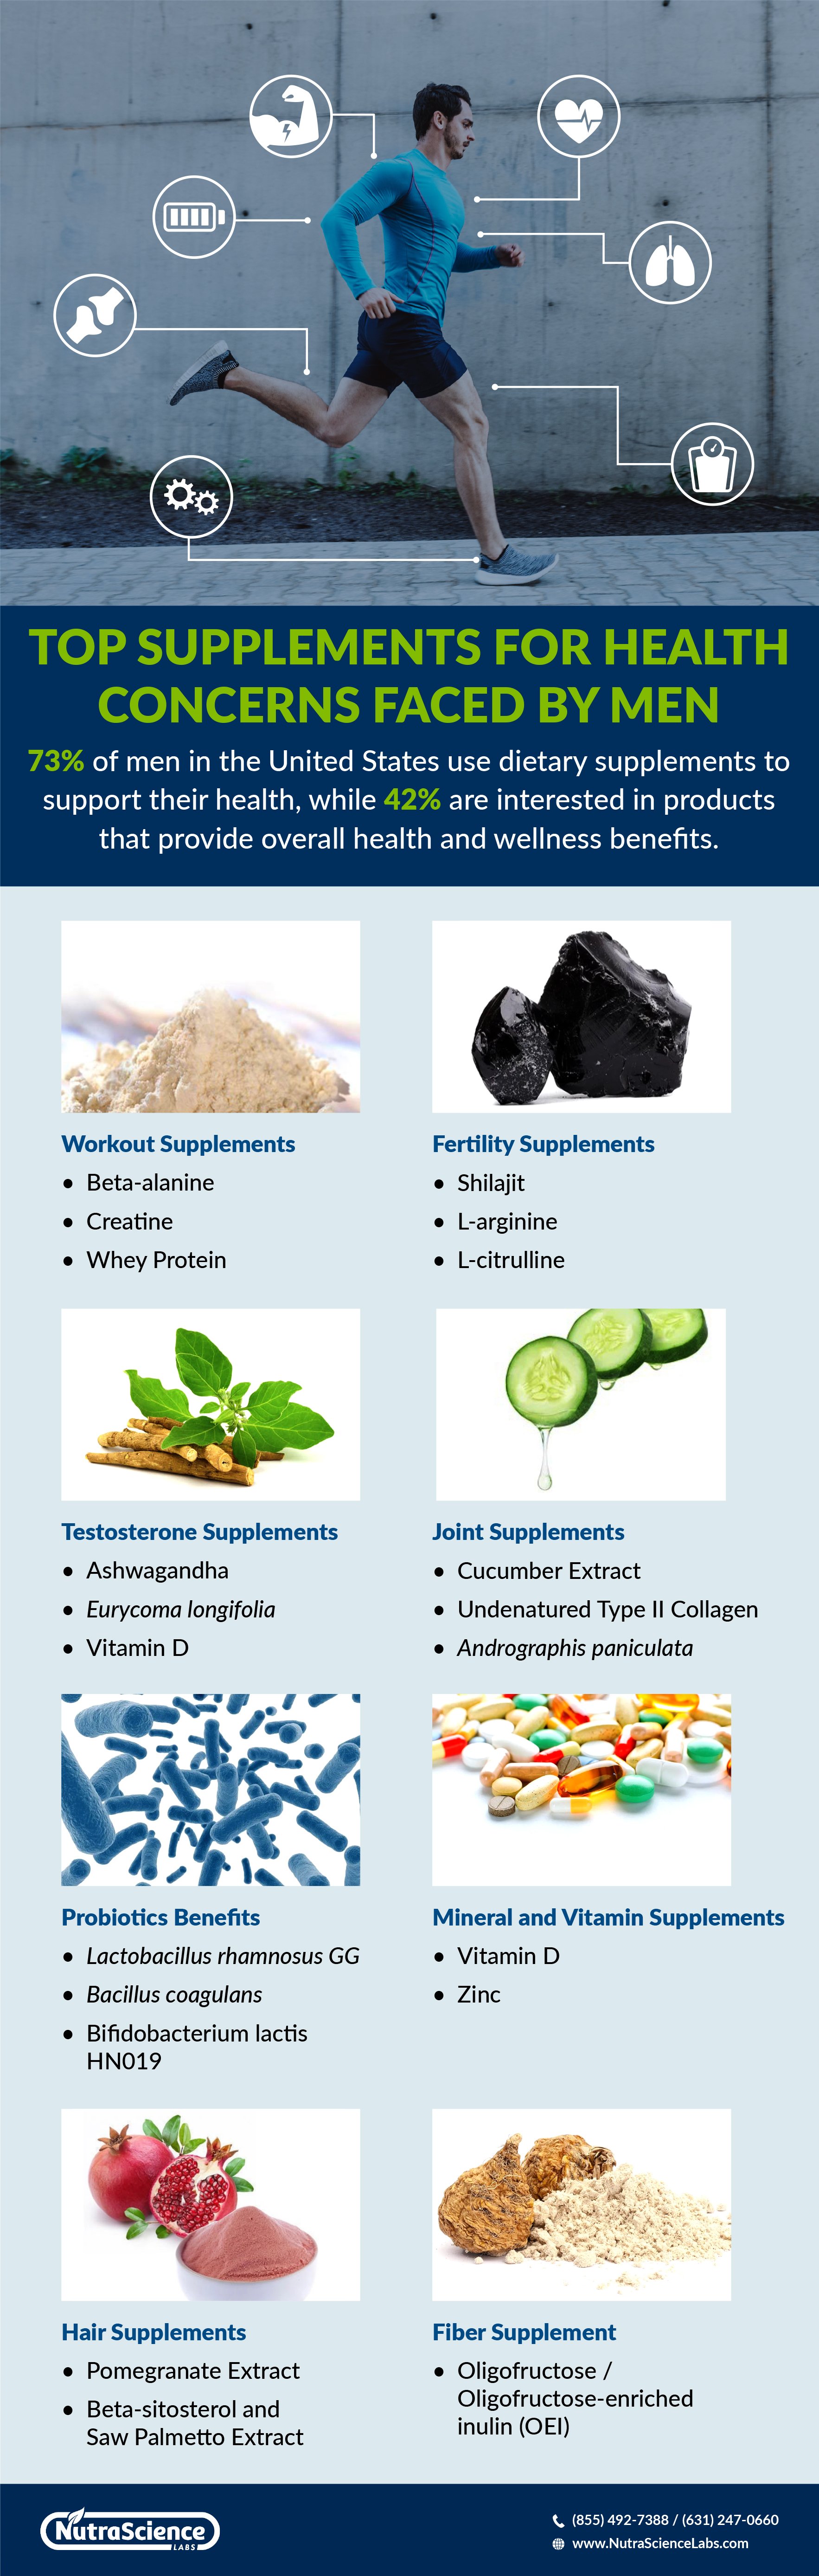 NSL - Infographic - Top Supplements for Health Concerns faced by Men